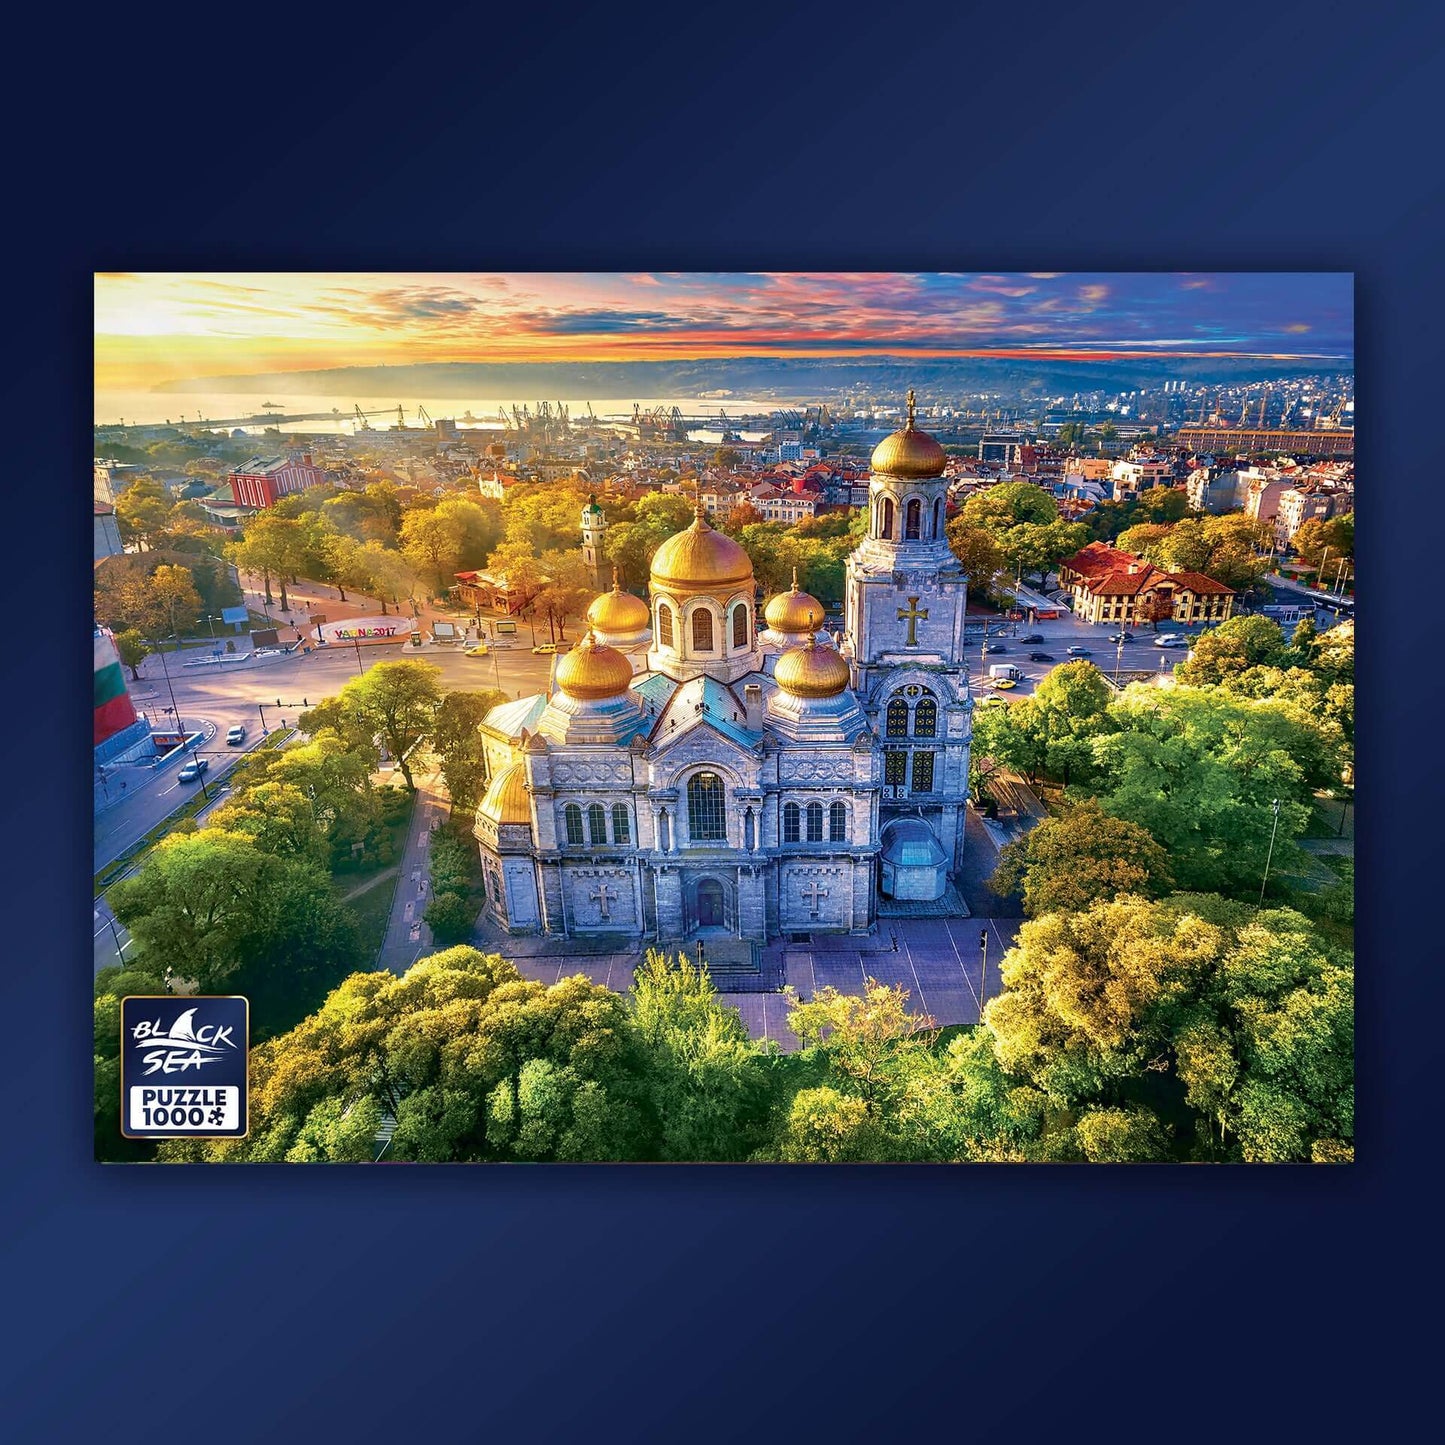 Puzzle Black Sea 1000 pieces - Varna, Varna’s cathedral Uspenie Bogorodichno (Dormition of the Mother of God) is among the city’s most distinctive landmarks. It is a truly magnificent church that was erected in 1885 and since then it has served to the Chr